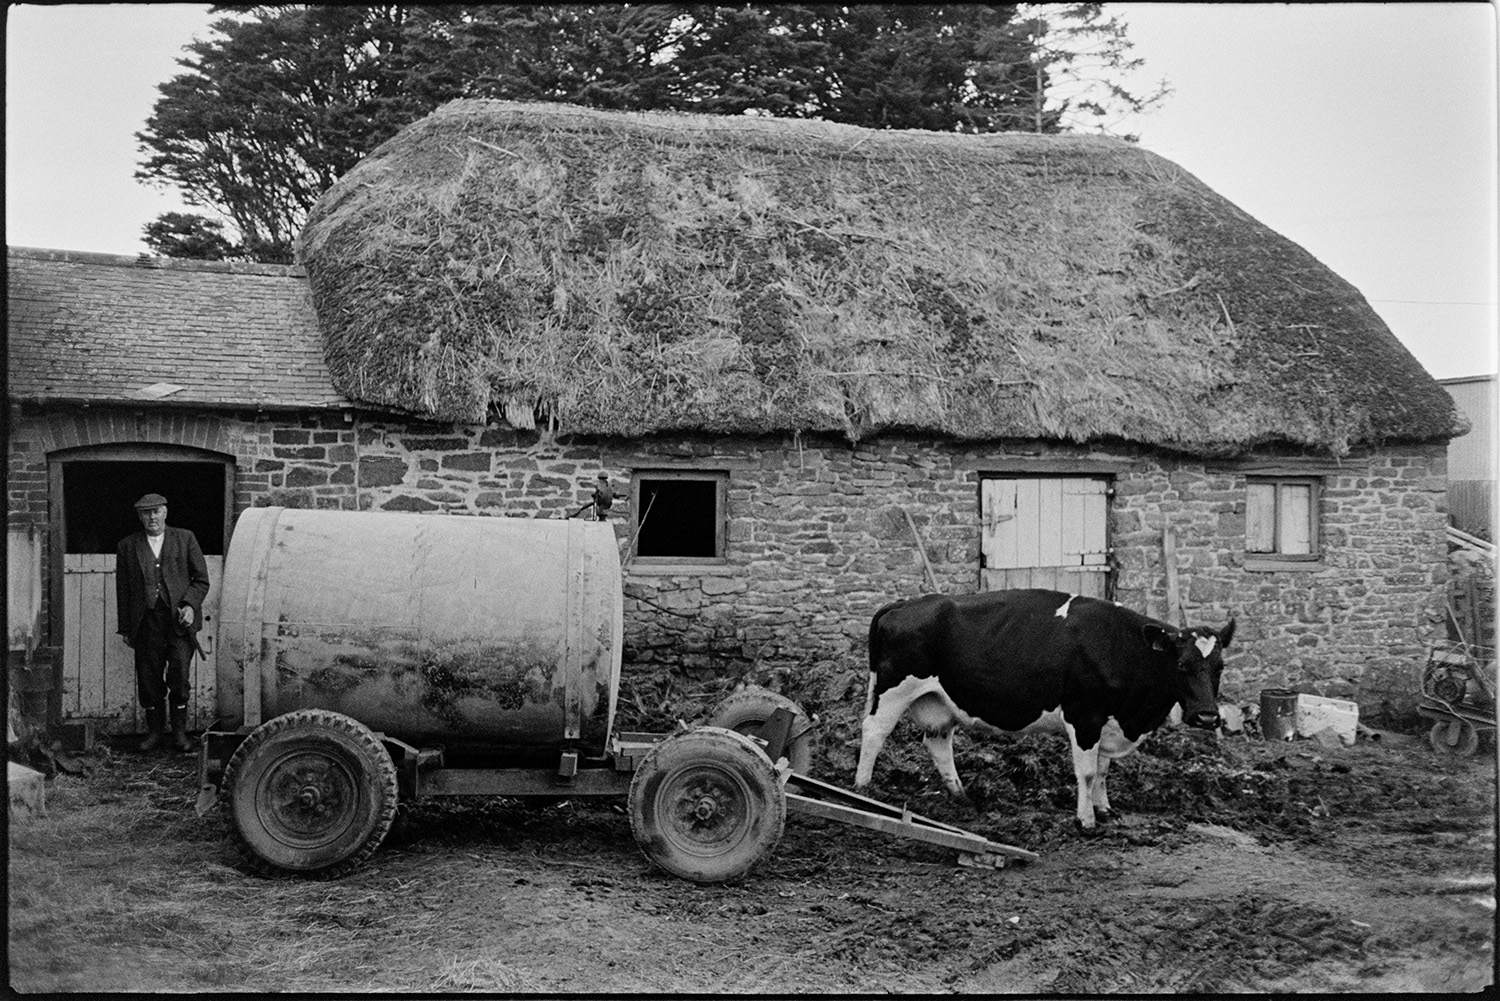 Thatched stone barn, water tank, good building. 
[A water tank on a trailer and a cow in the muddy farmyard at High House, Atherington. A thatched stone barn is visible in the background and Mr Wescott is stood outside the barn.]